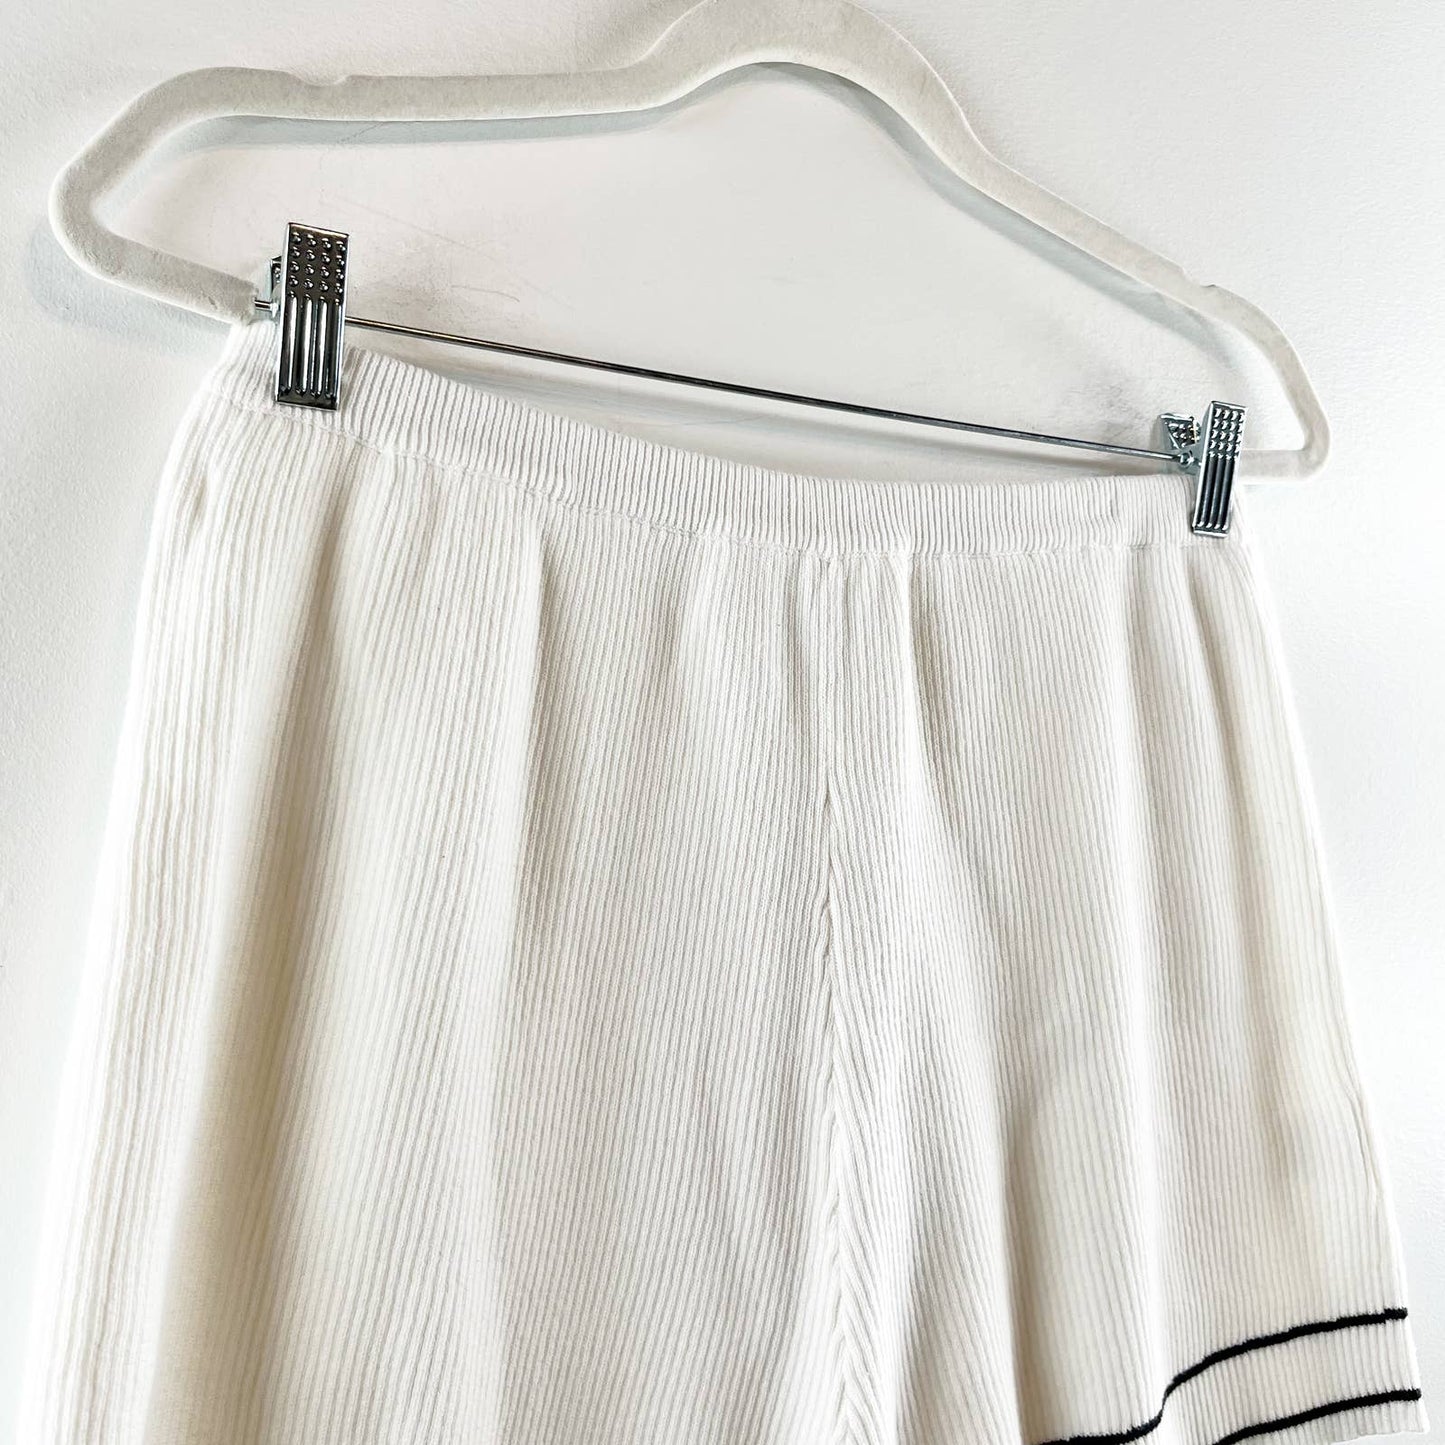 Sabo Mika Cotton High Rise Elasticated Waist Ribbed Knit Shorts Off-White Large